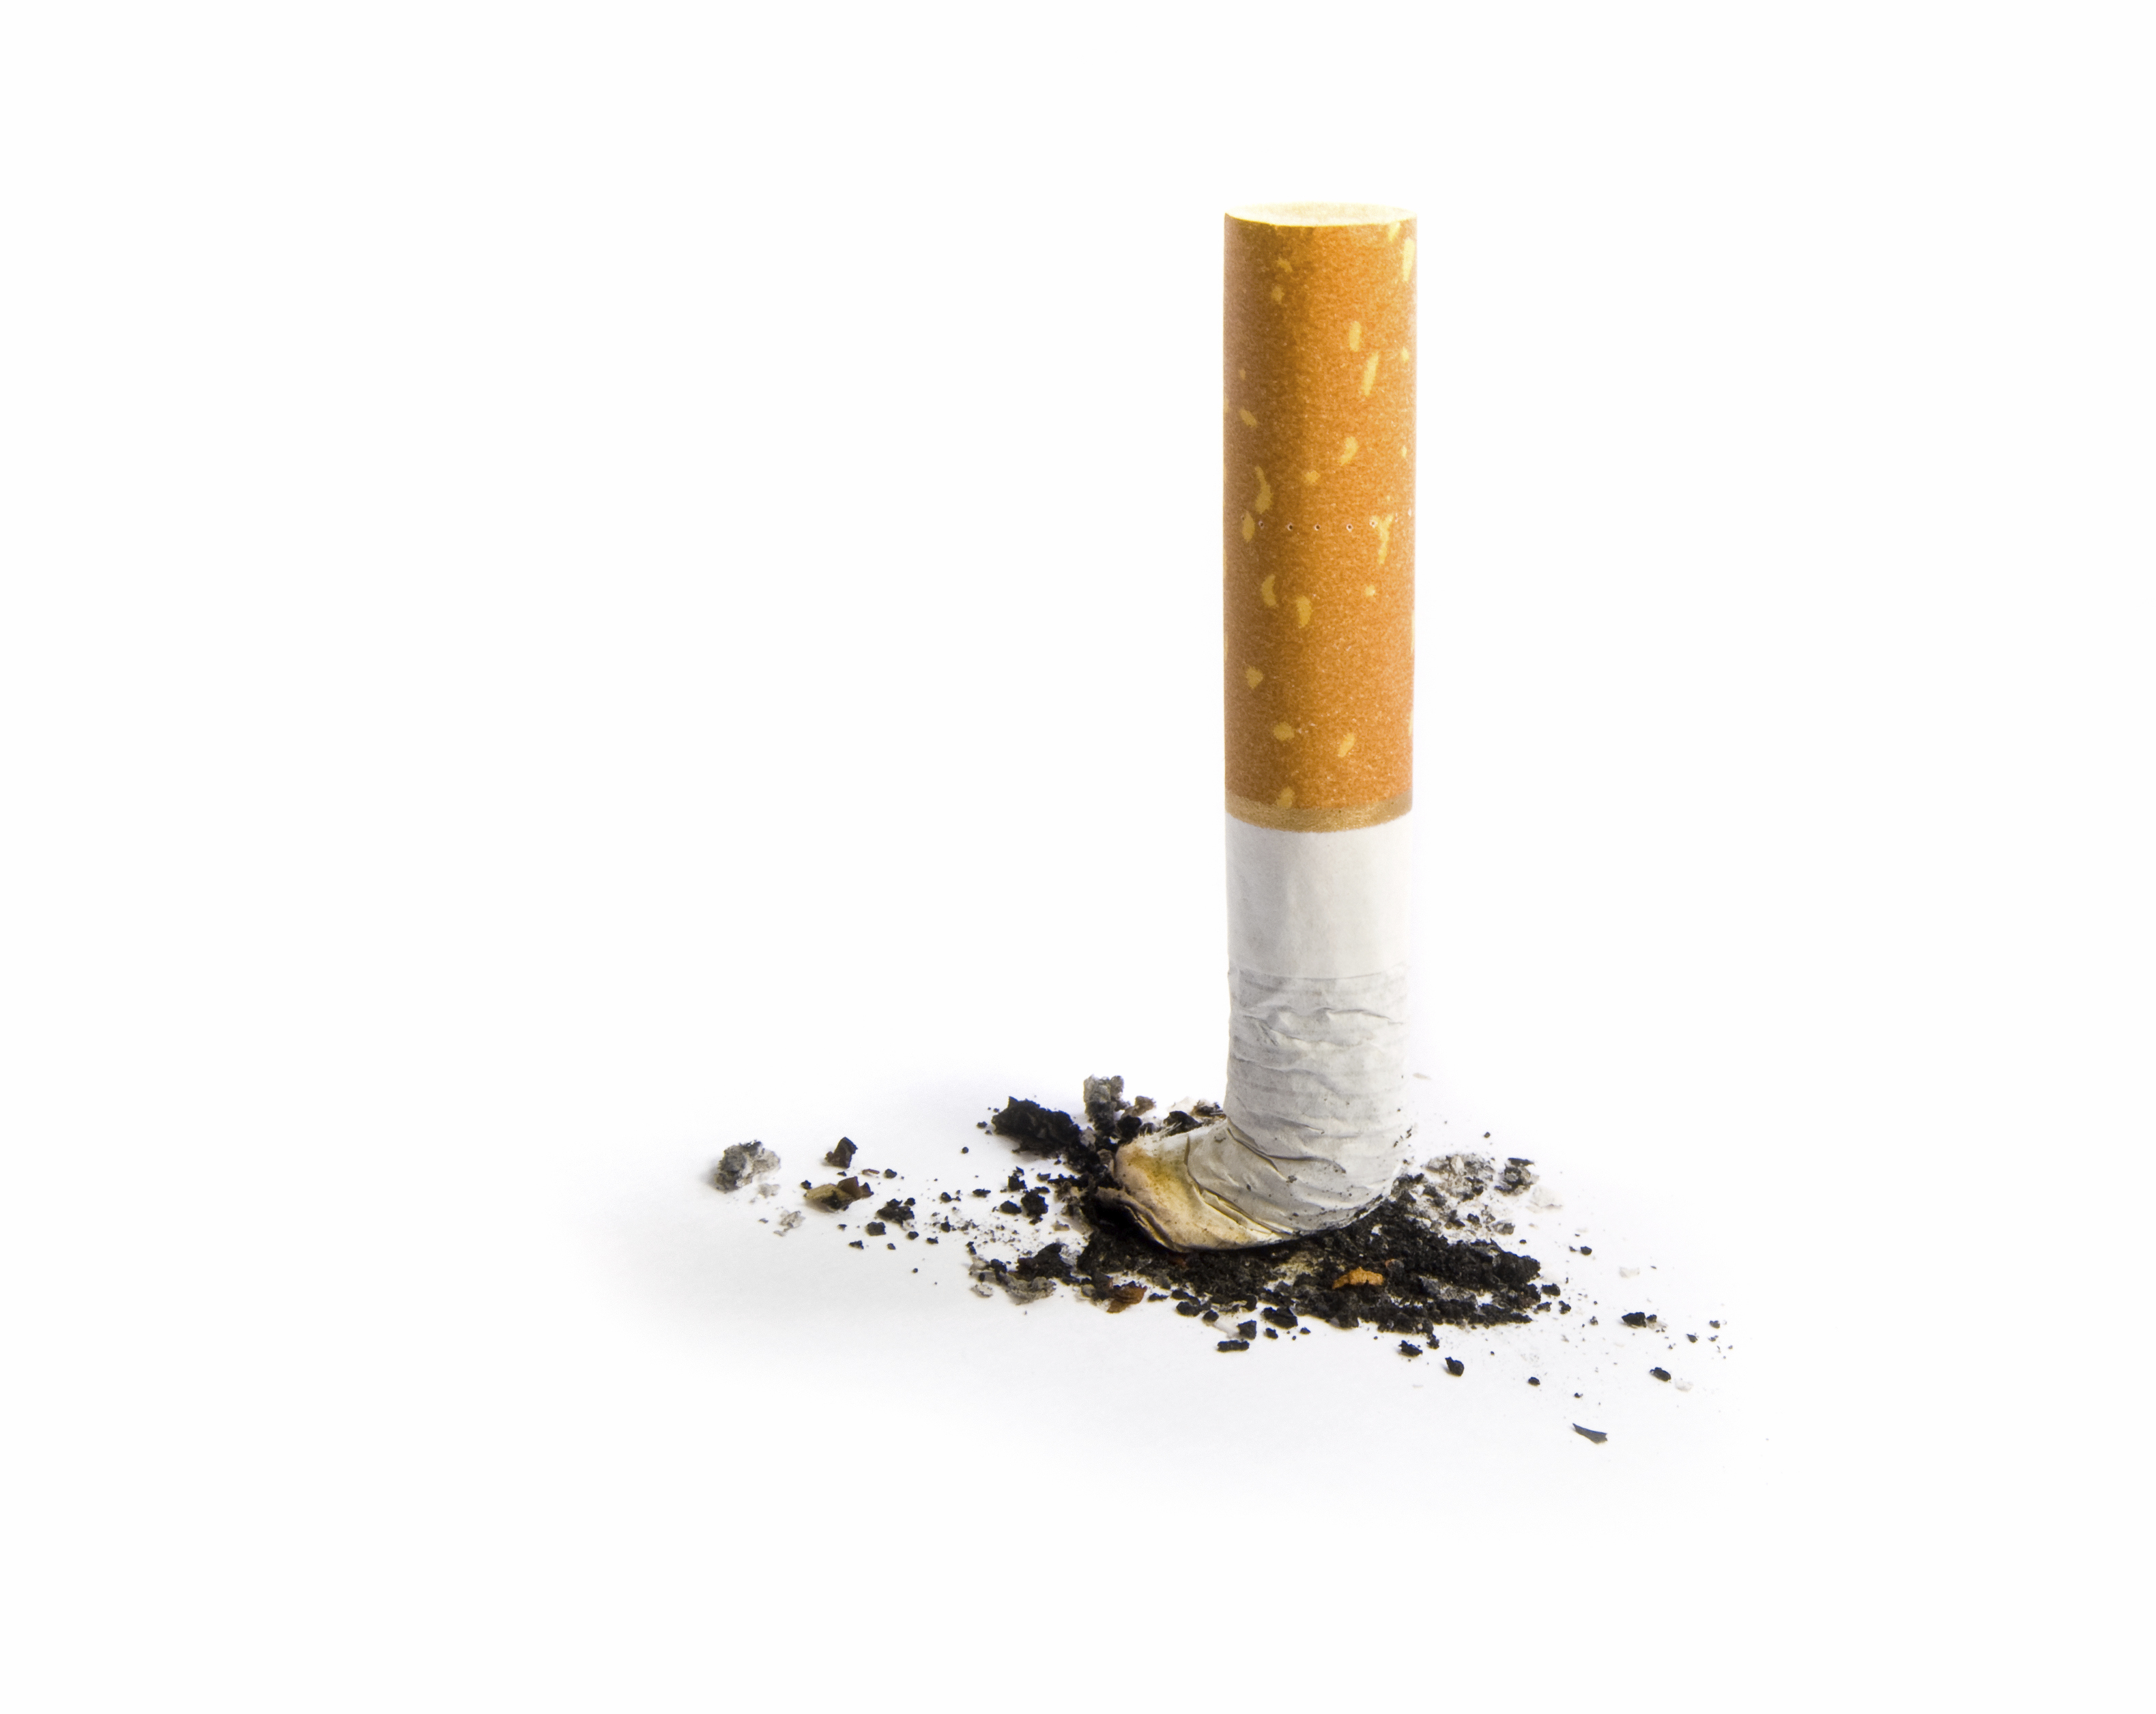 HD Quality Wallpaper | Collection: Man Made, 3159x2512 Cigarette